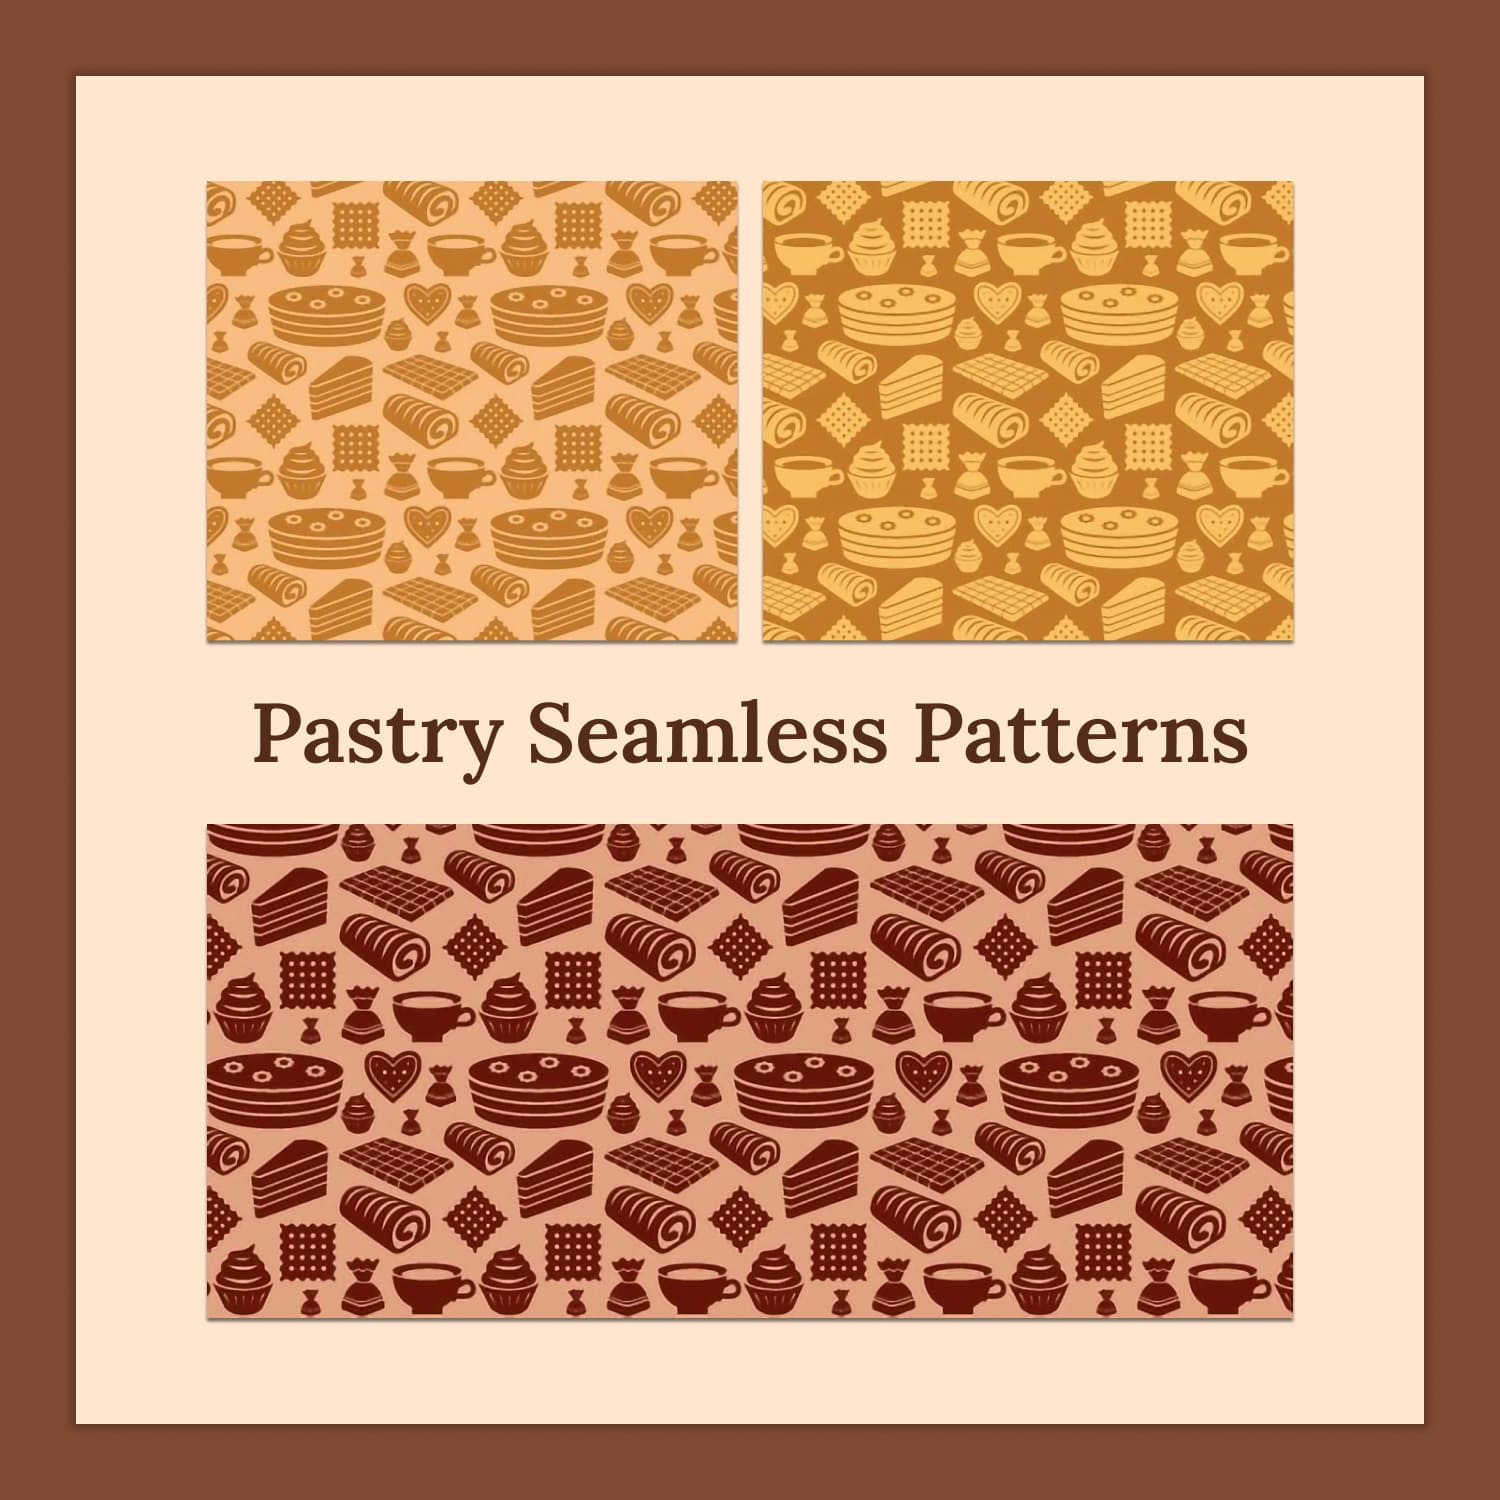 Pastry seamless patterns - main image preview.